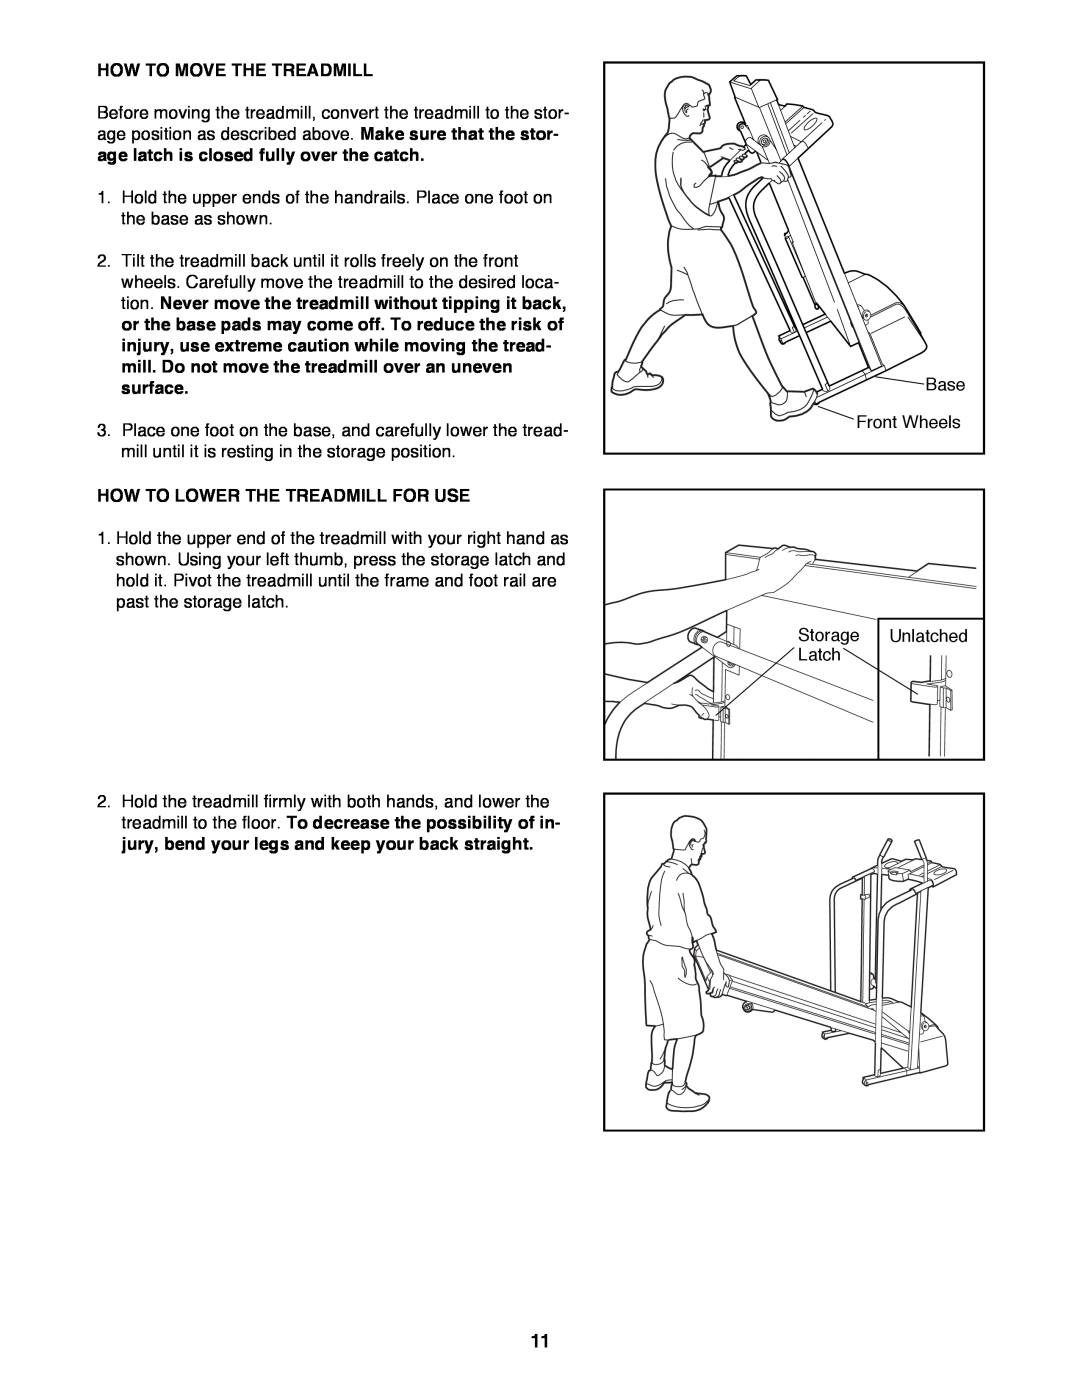 ProForm 831.298061 user manual How To Move The Treadmill, How To Lower The Treadmill For Use 